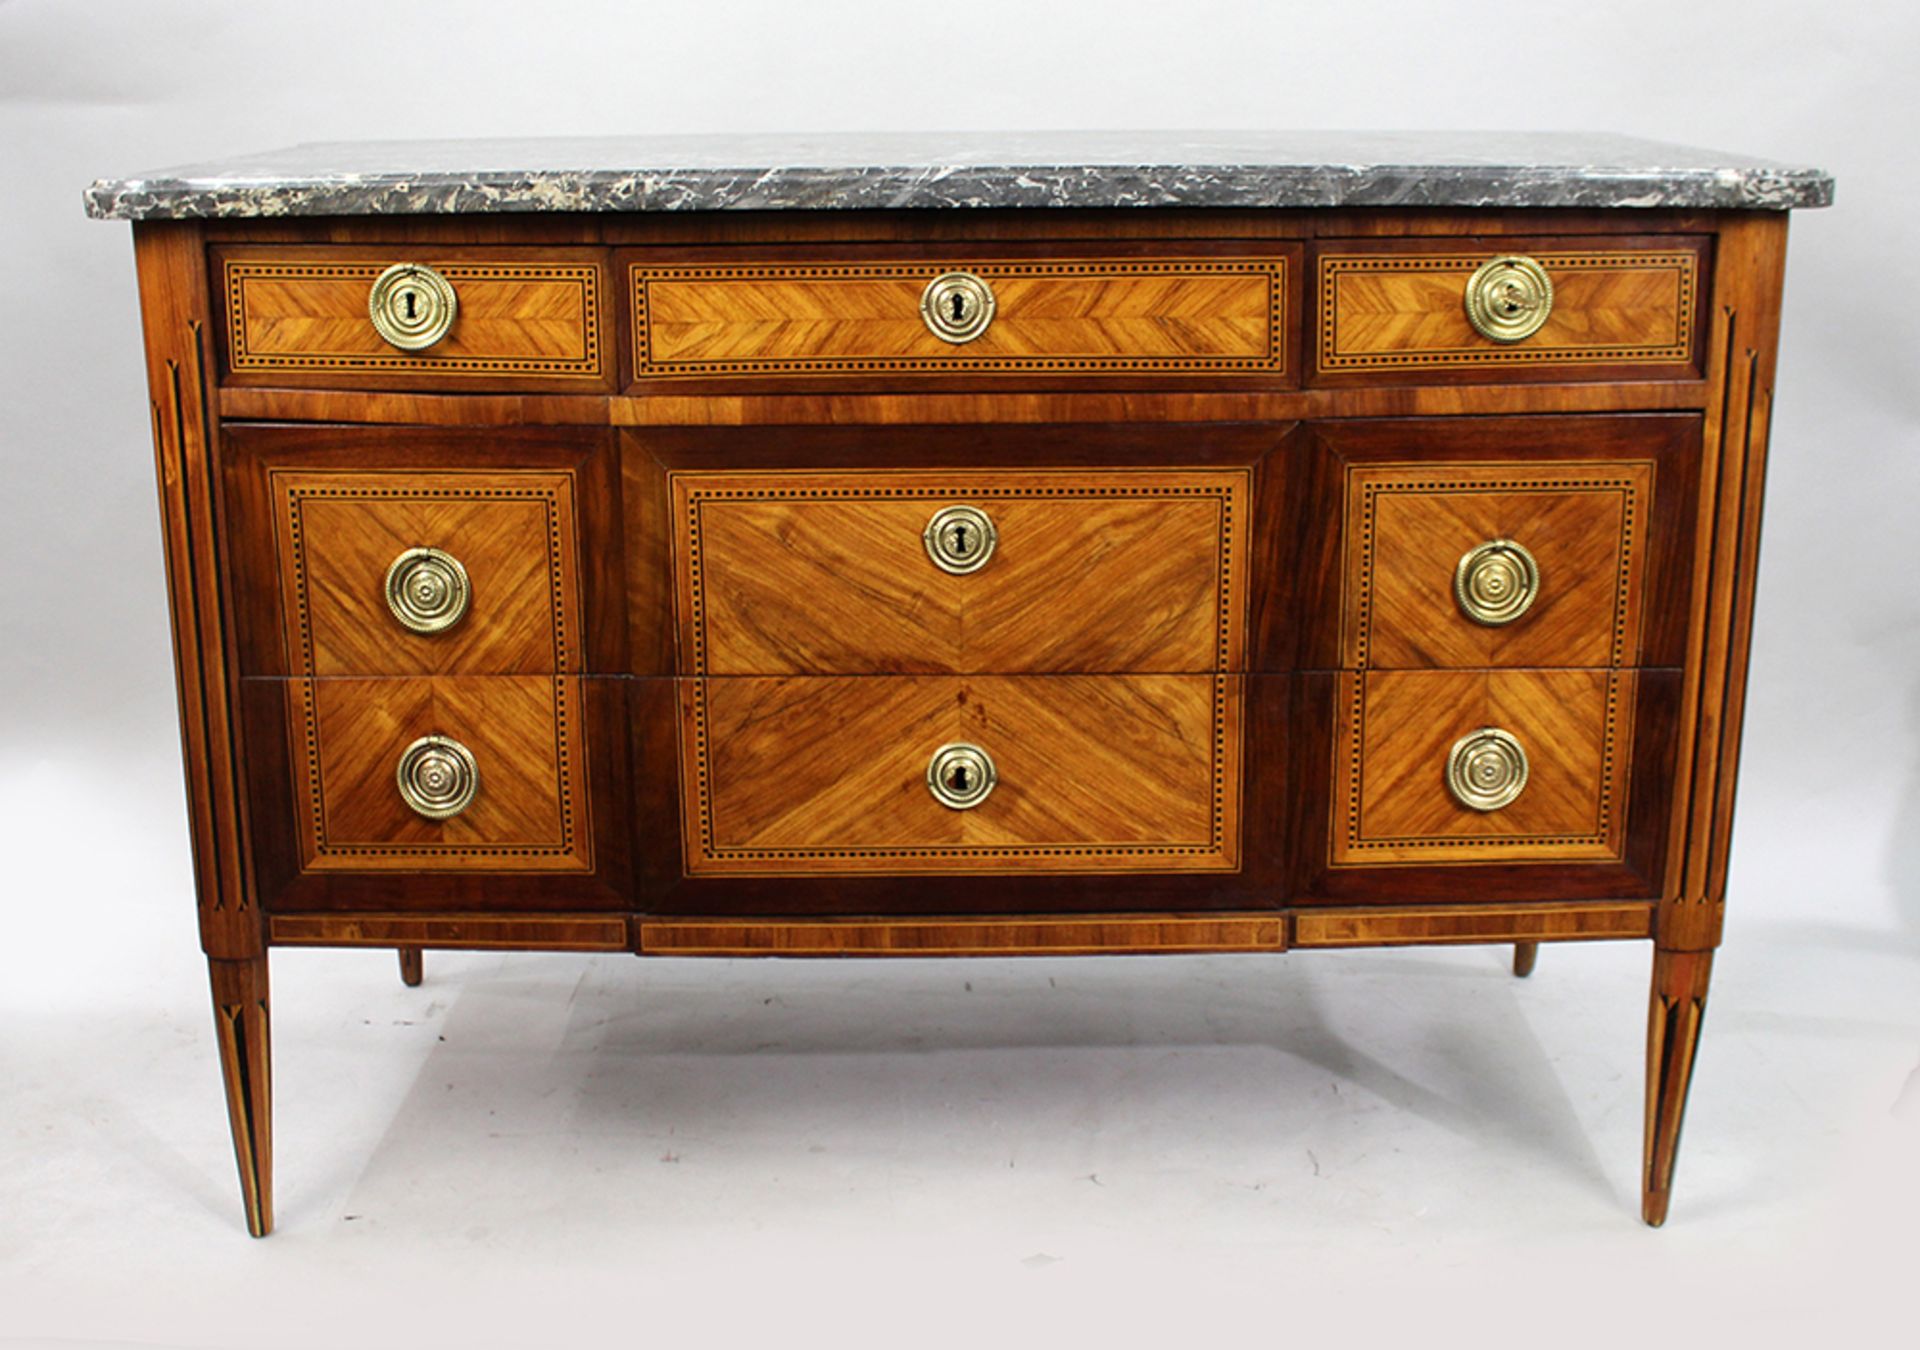 18th c. Inlaid Marble Topped Commode